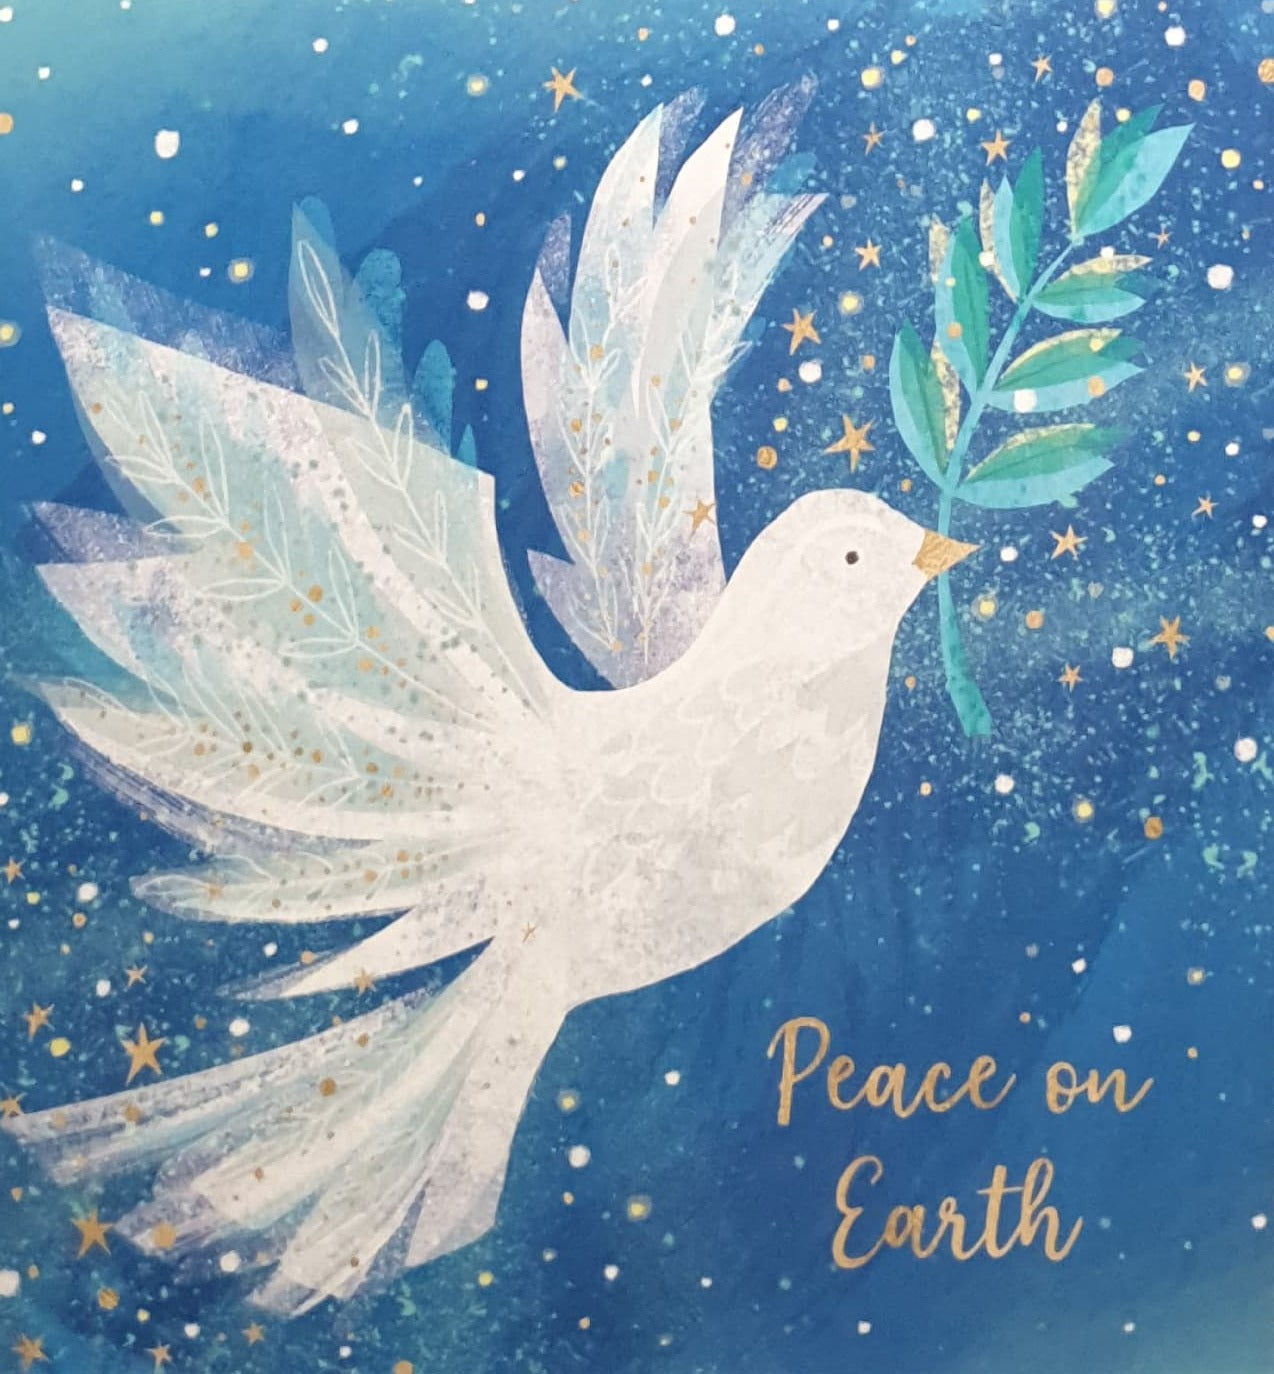 Charity Christmas Cards - Pack of 8 / Down Syndrome Ireland - White Dove & Peace on Earth